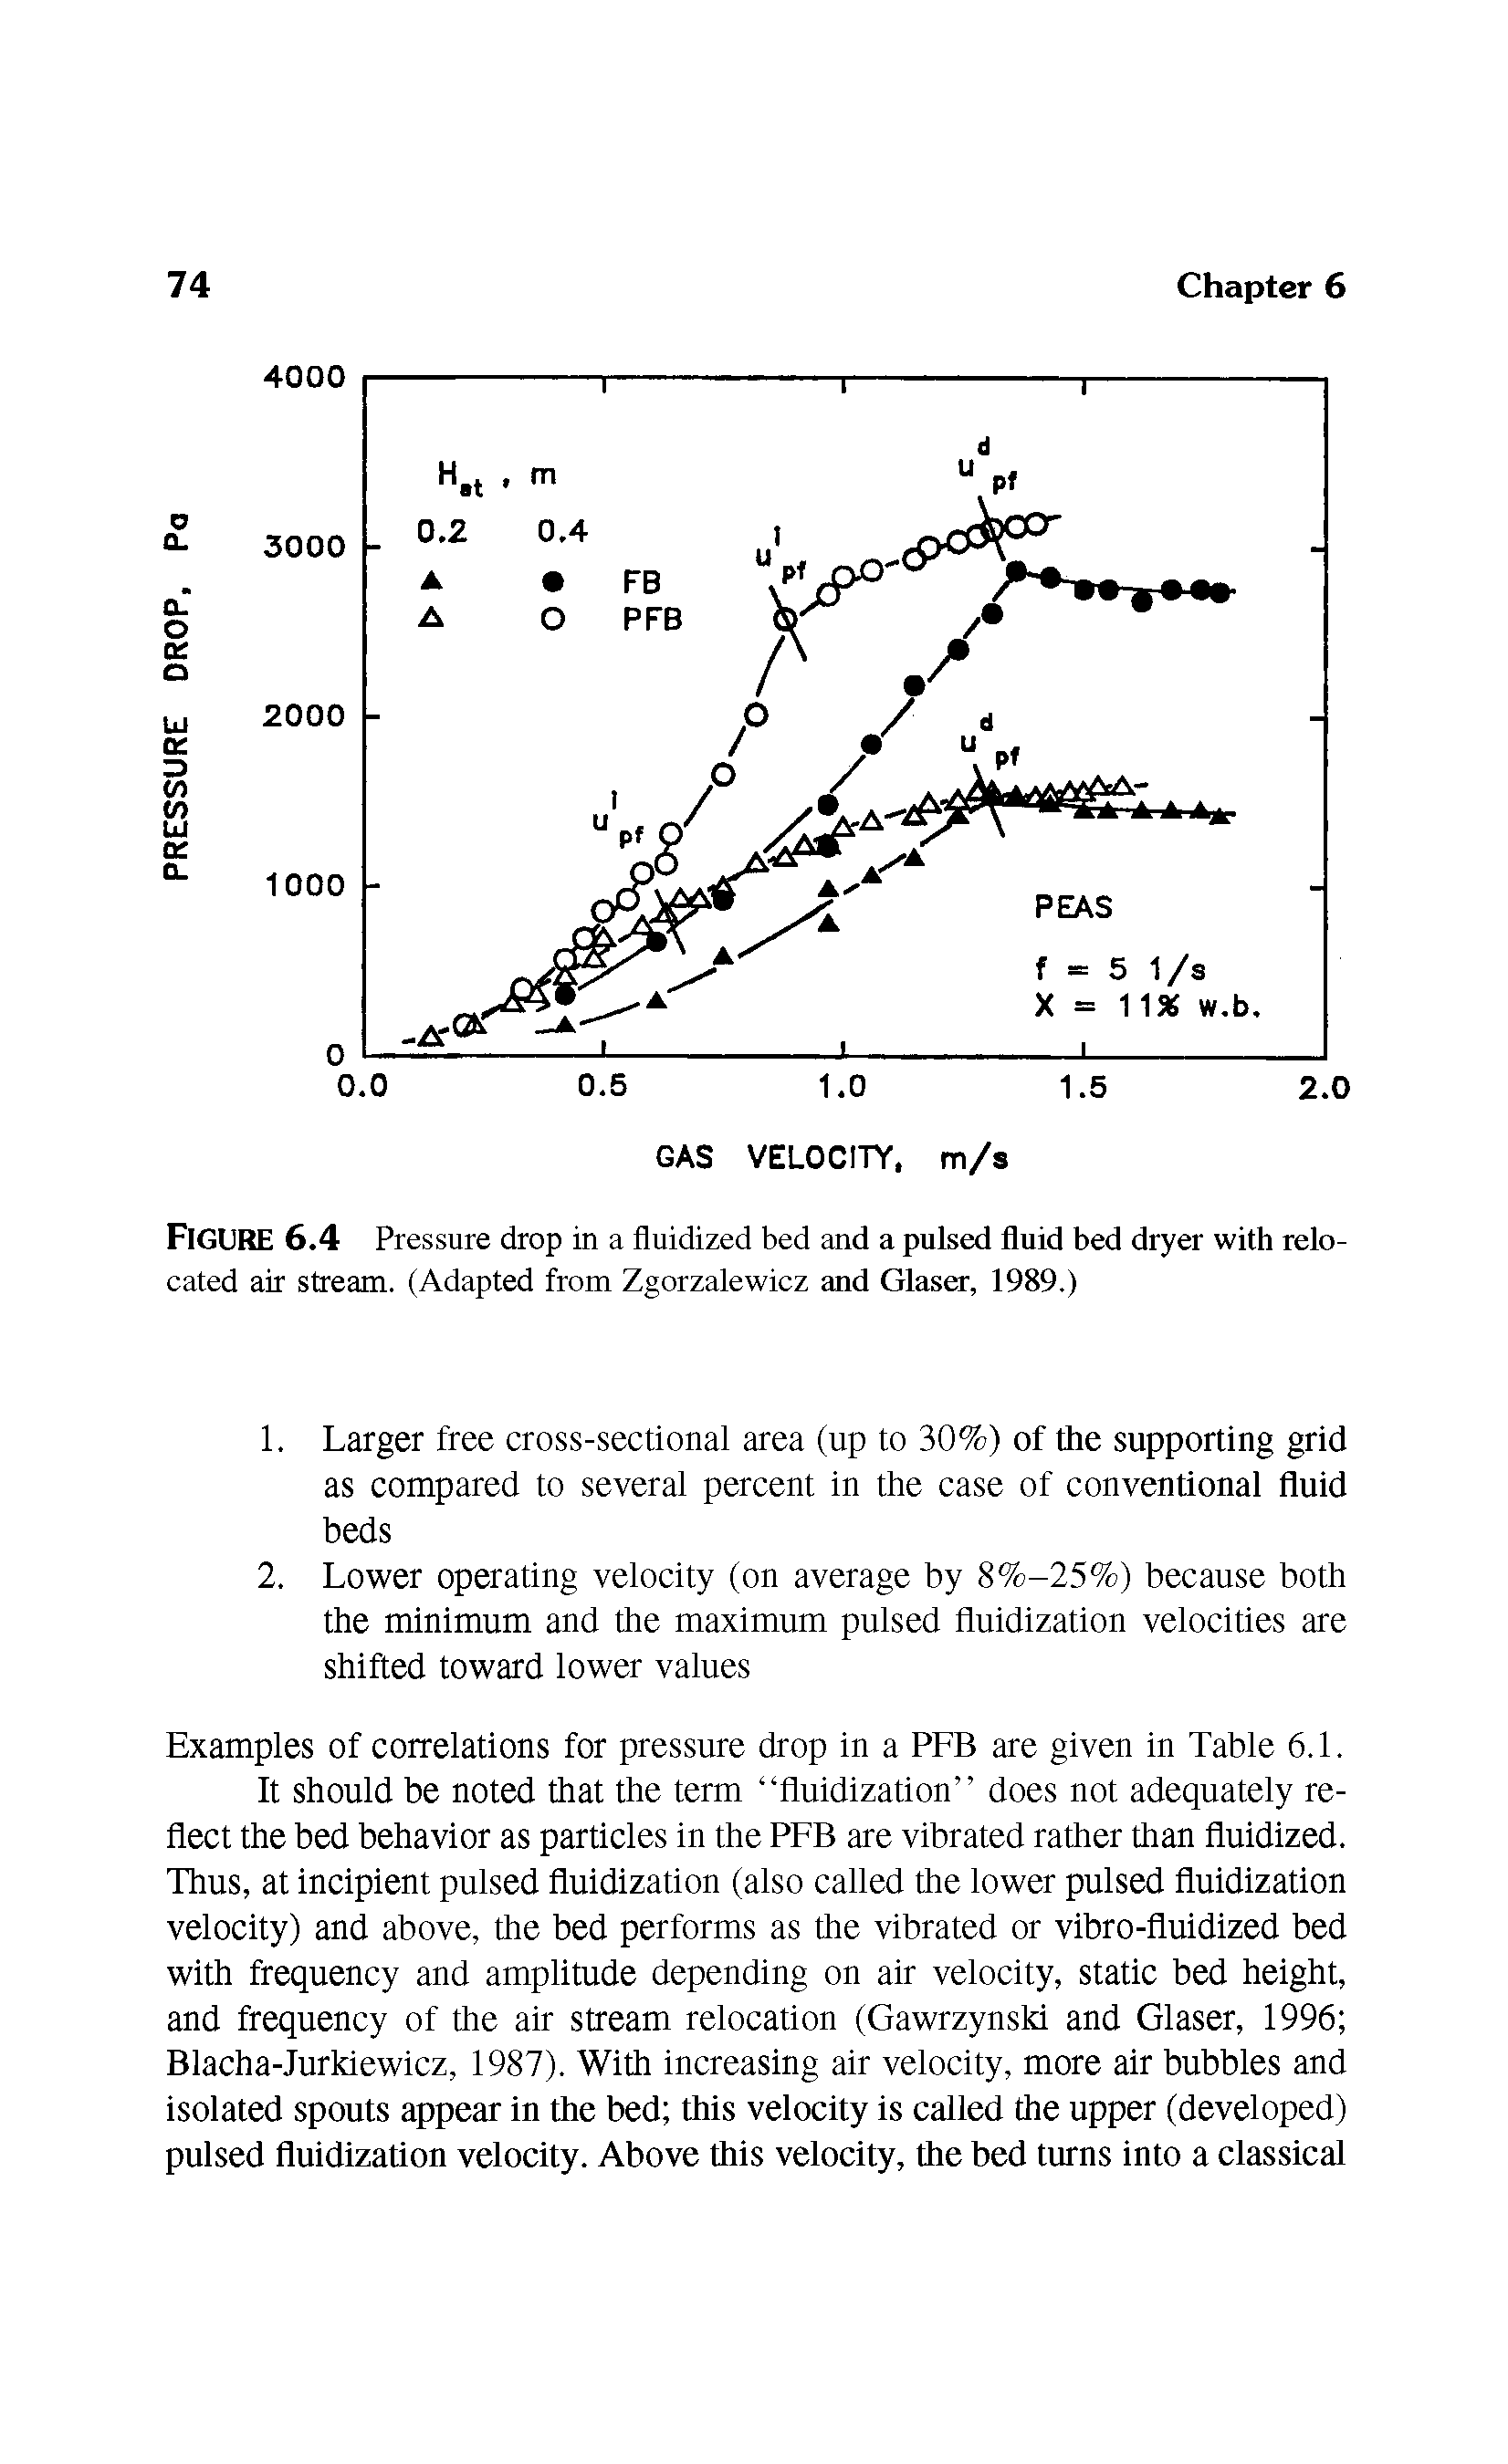 Figure 6.4 Pressure drop in a fluidized bed and a pulsed fluid bed dryer with relocated air stream. (Adapted from Zgorzalewicz and Glaser, 1989.)...